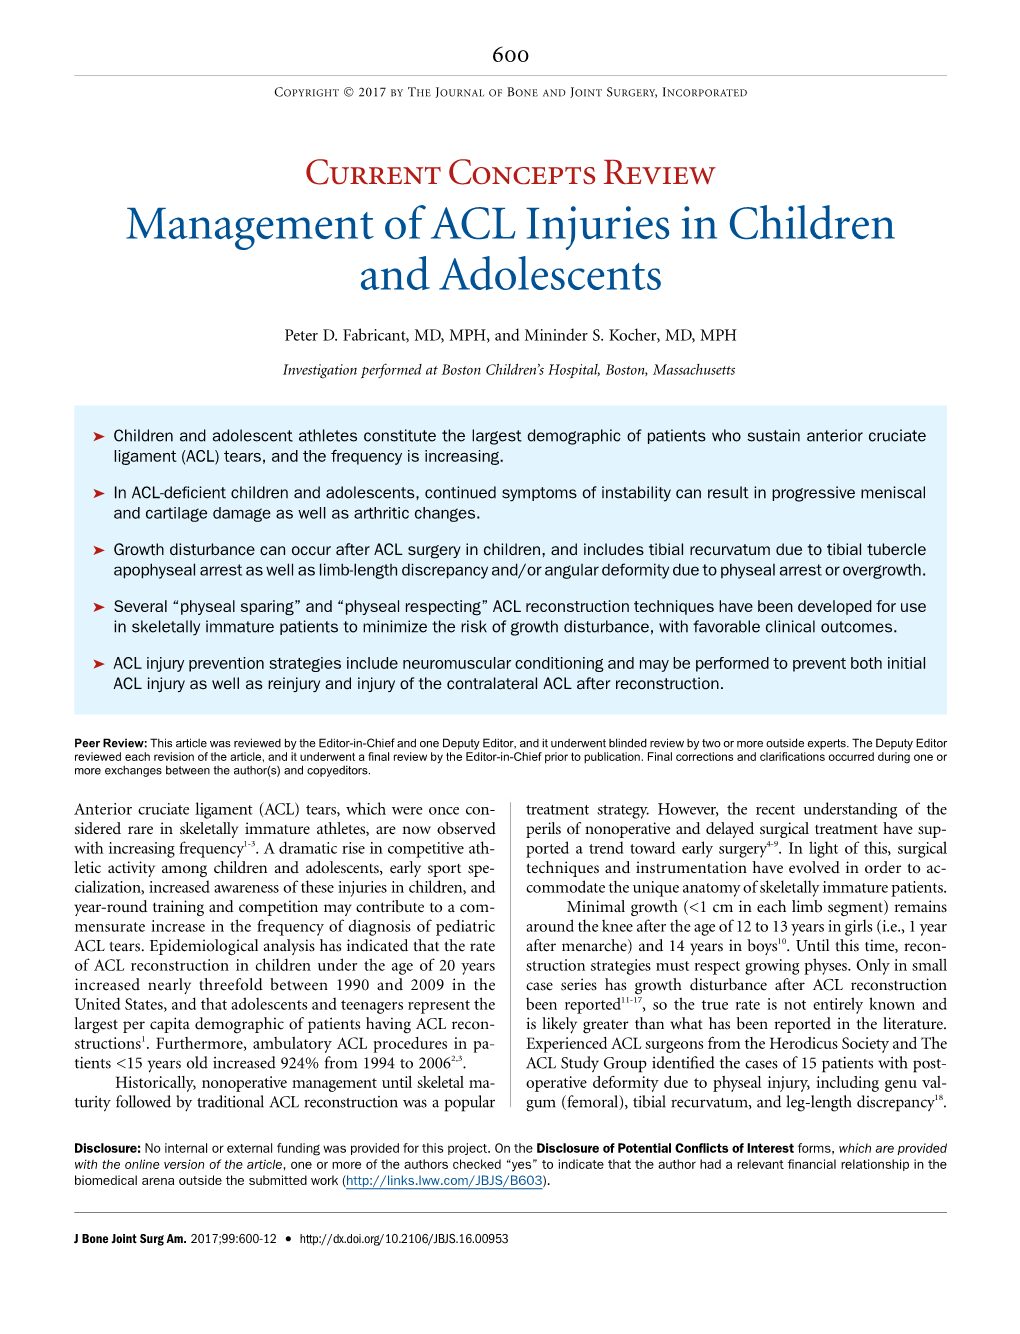 Management of ACL Injuries in Children and Adolescents